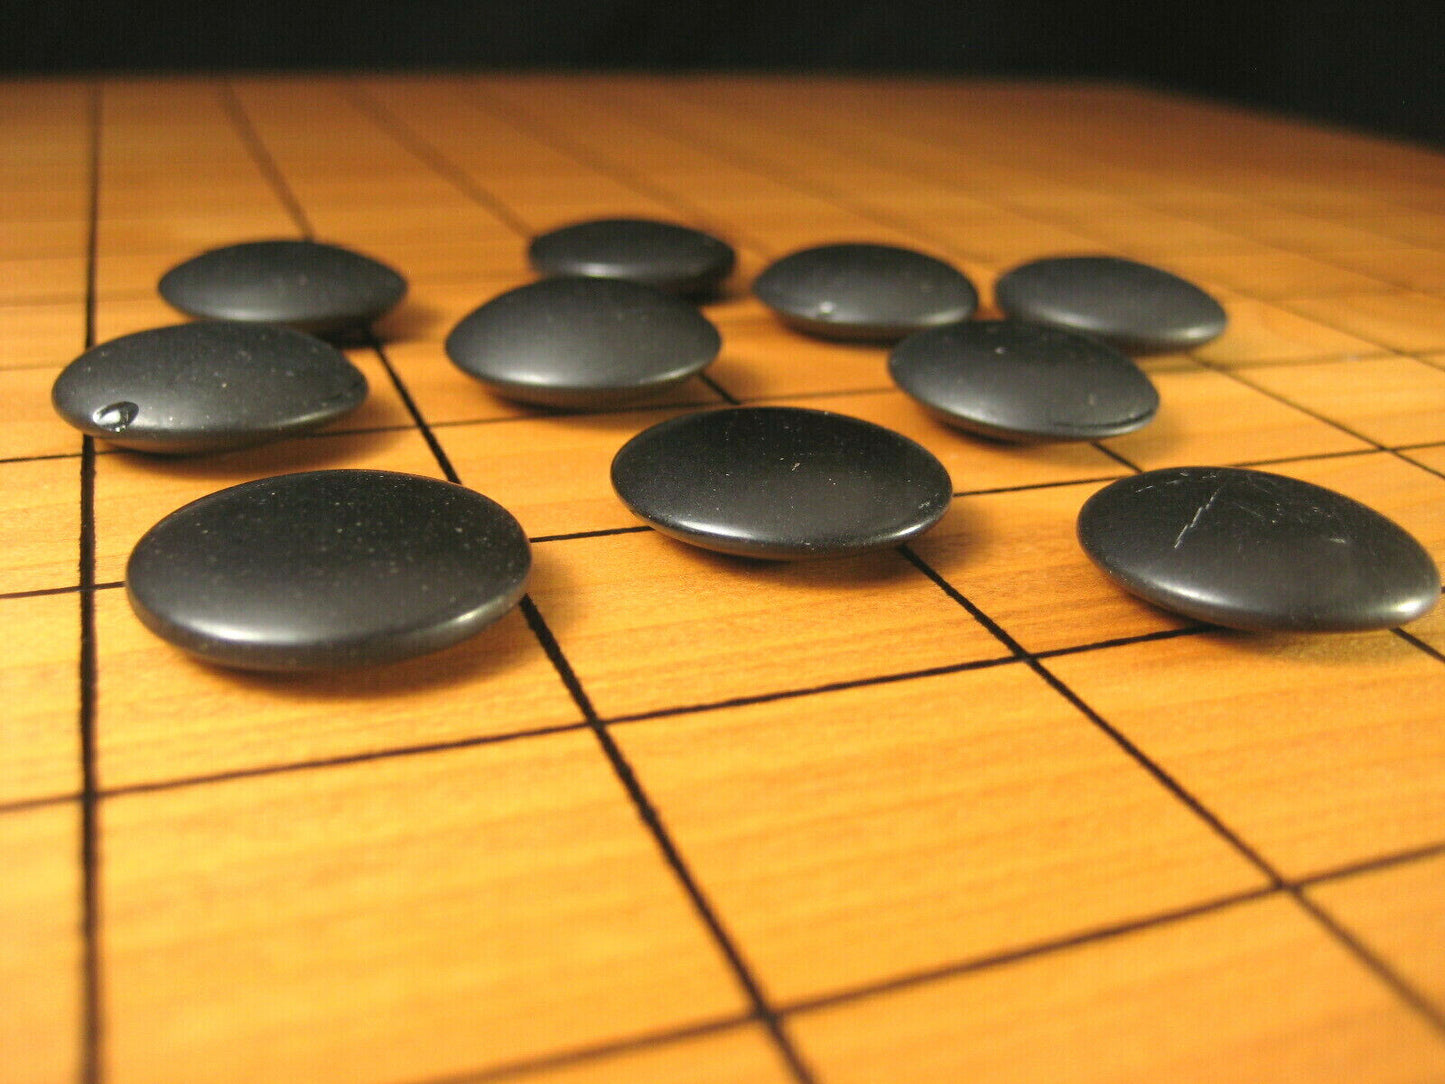 Vintage Japanese Go Game Stones X10 For Replacement - Black Glass 10Pcs ~1/8"